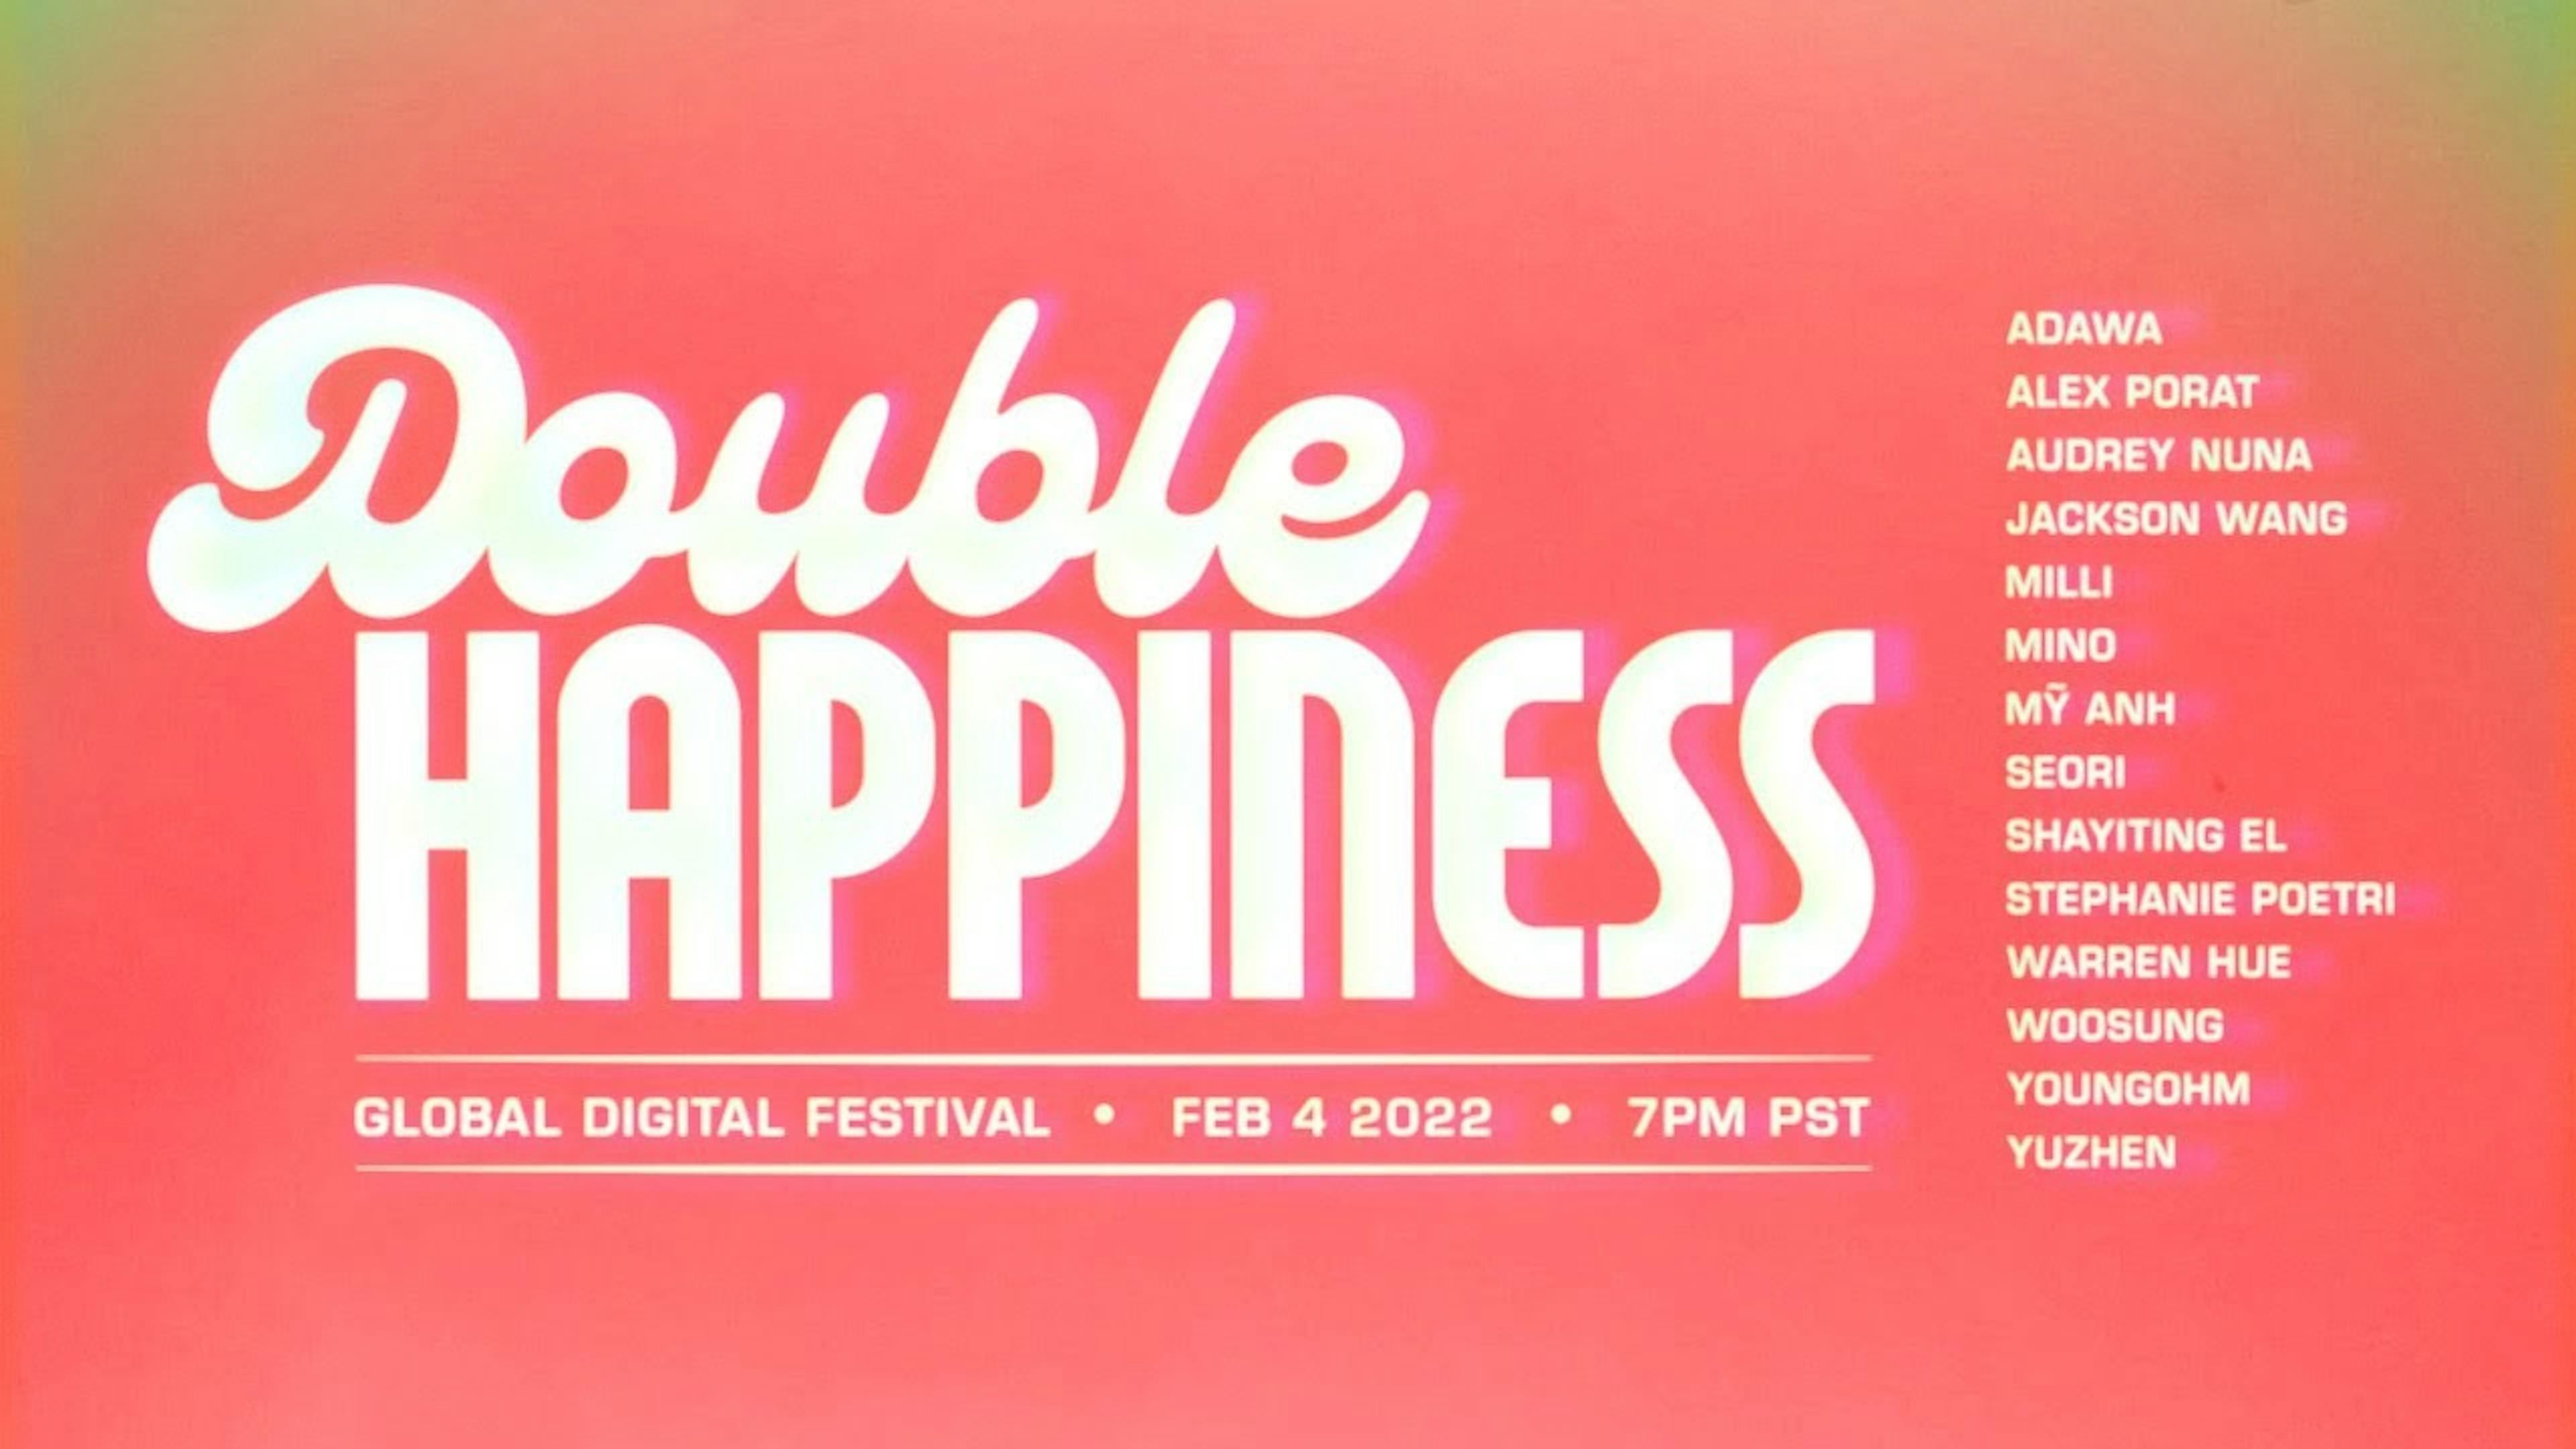 Promotional graphic for 'Double Happiness Global Digital Festival' held on February 4, 2022, at 7 PM PST. The graphic features a bright coral background with the event's title 'Double Happiness' in large, stylized white script in the center. Below the title, in smaller white text, the words 'GLOBAL DIGITAL FESTIVAL' and the event date and time are listed. To the right side, there is a list of performing artists in white block letters, including names such as ADWA, ALEX PORAT, AUDREY NUNA, JACKSON WANG, MILLI, MINO, MY ANH, SEORI, SHAYITING EL, STEPHANIE POETRI, WARREN HUE, WOOSUNG, YOUNGOHM, and YUZHEN, indicating a diverse lineup for the event.